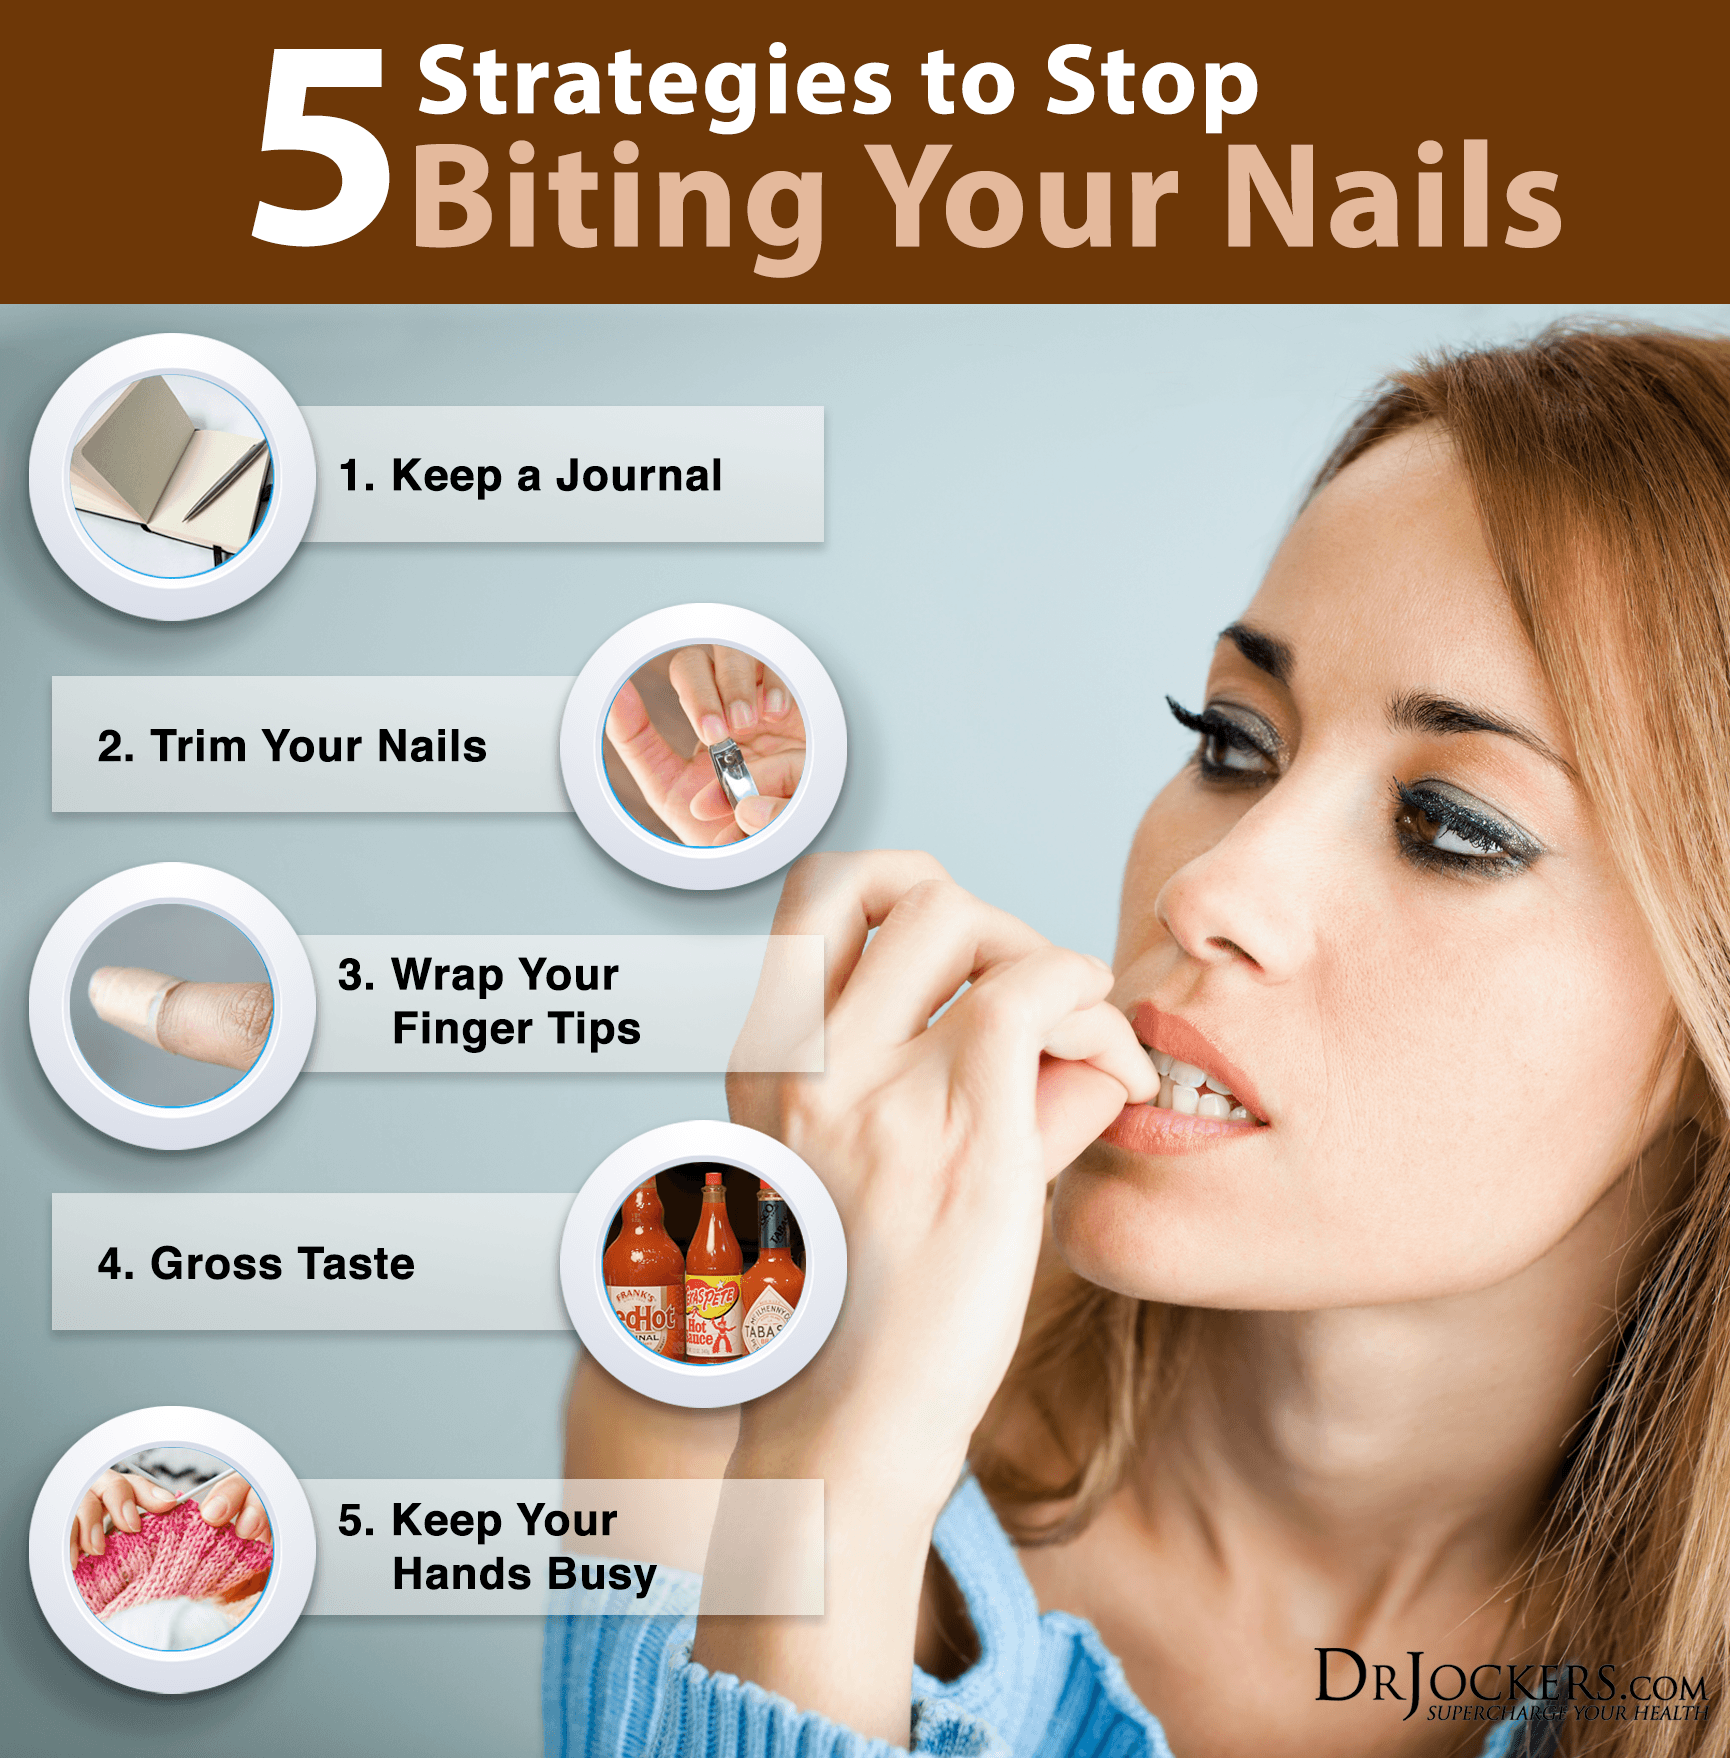 10 Nail Problems You Need to Know About 